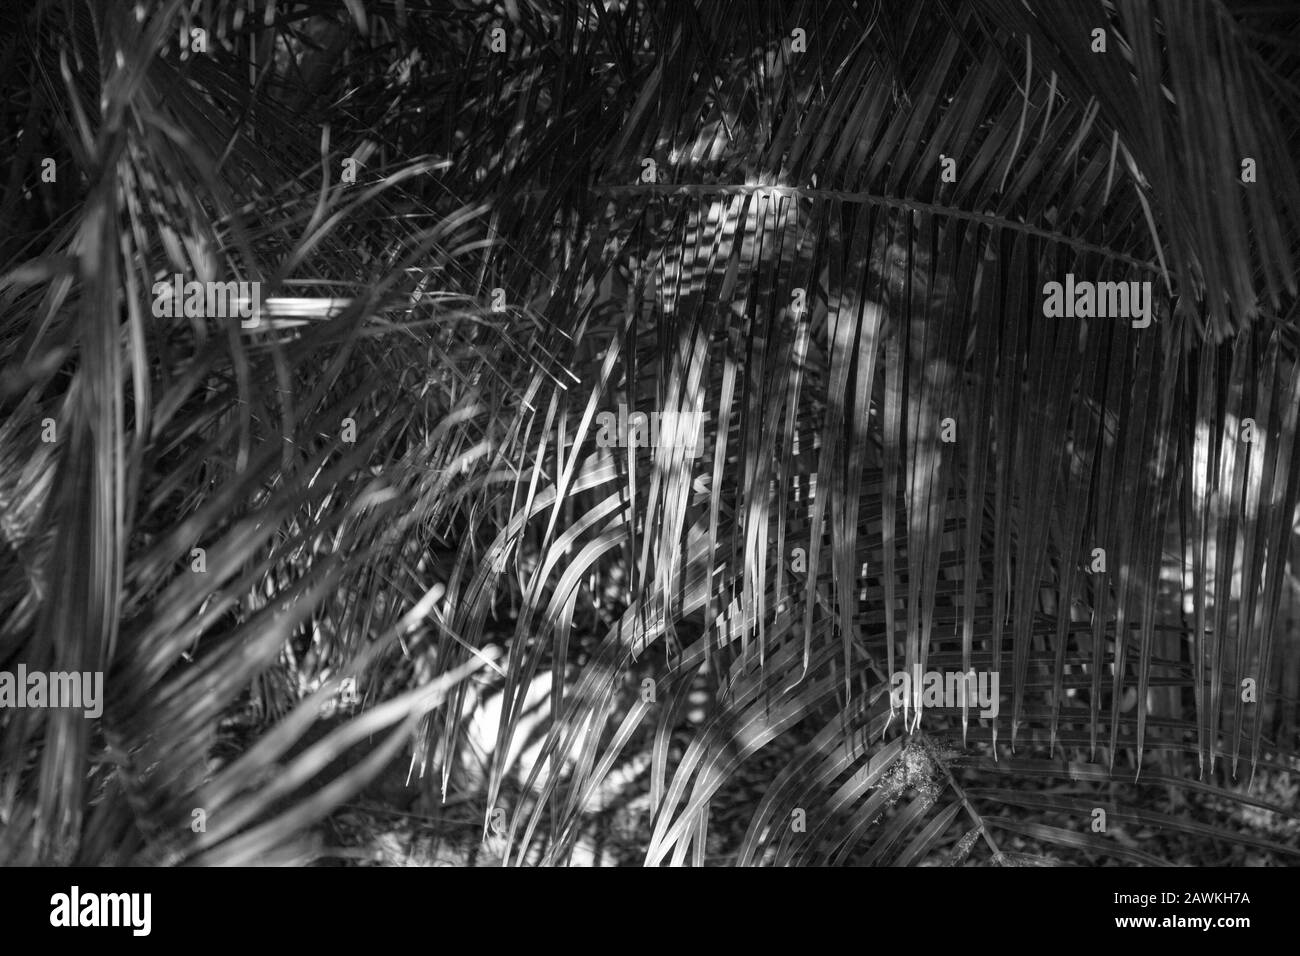 Black and white close-up of palm leaf seen in the garden. Stock Photo